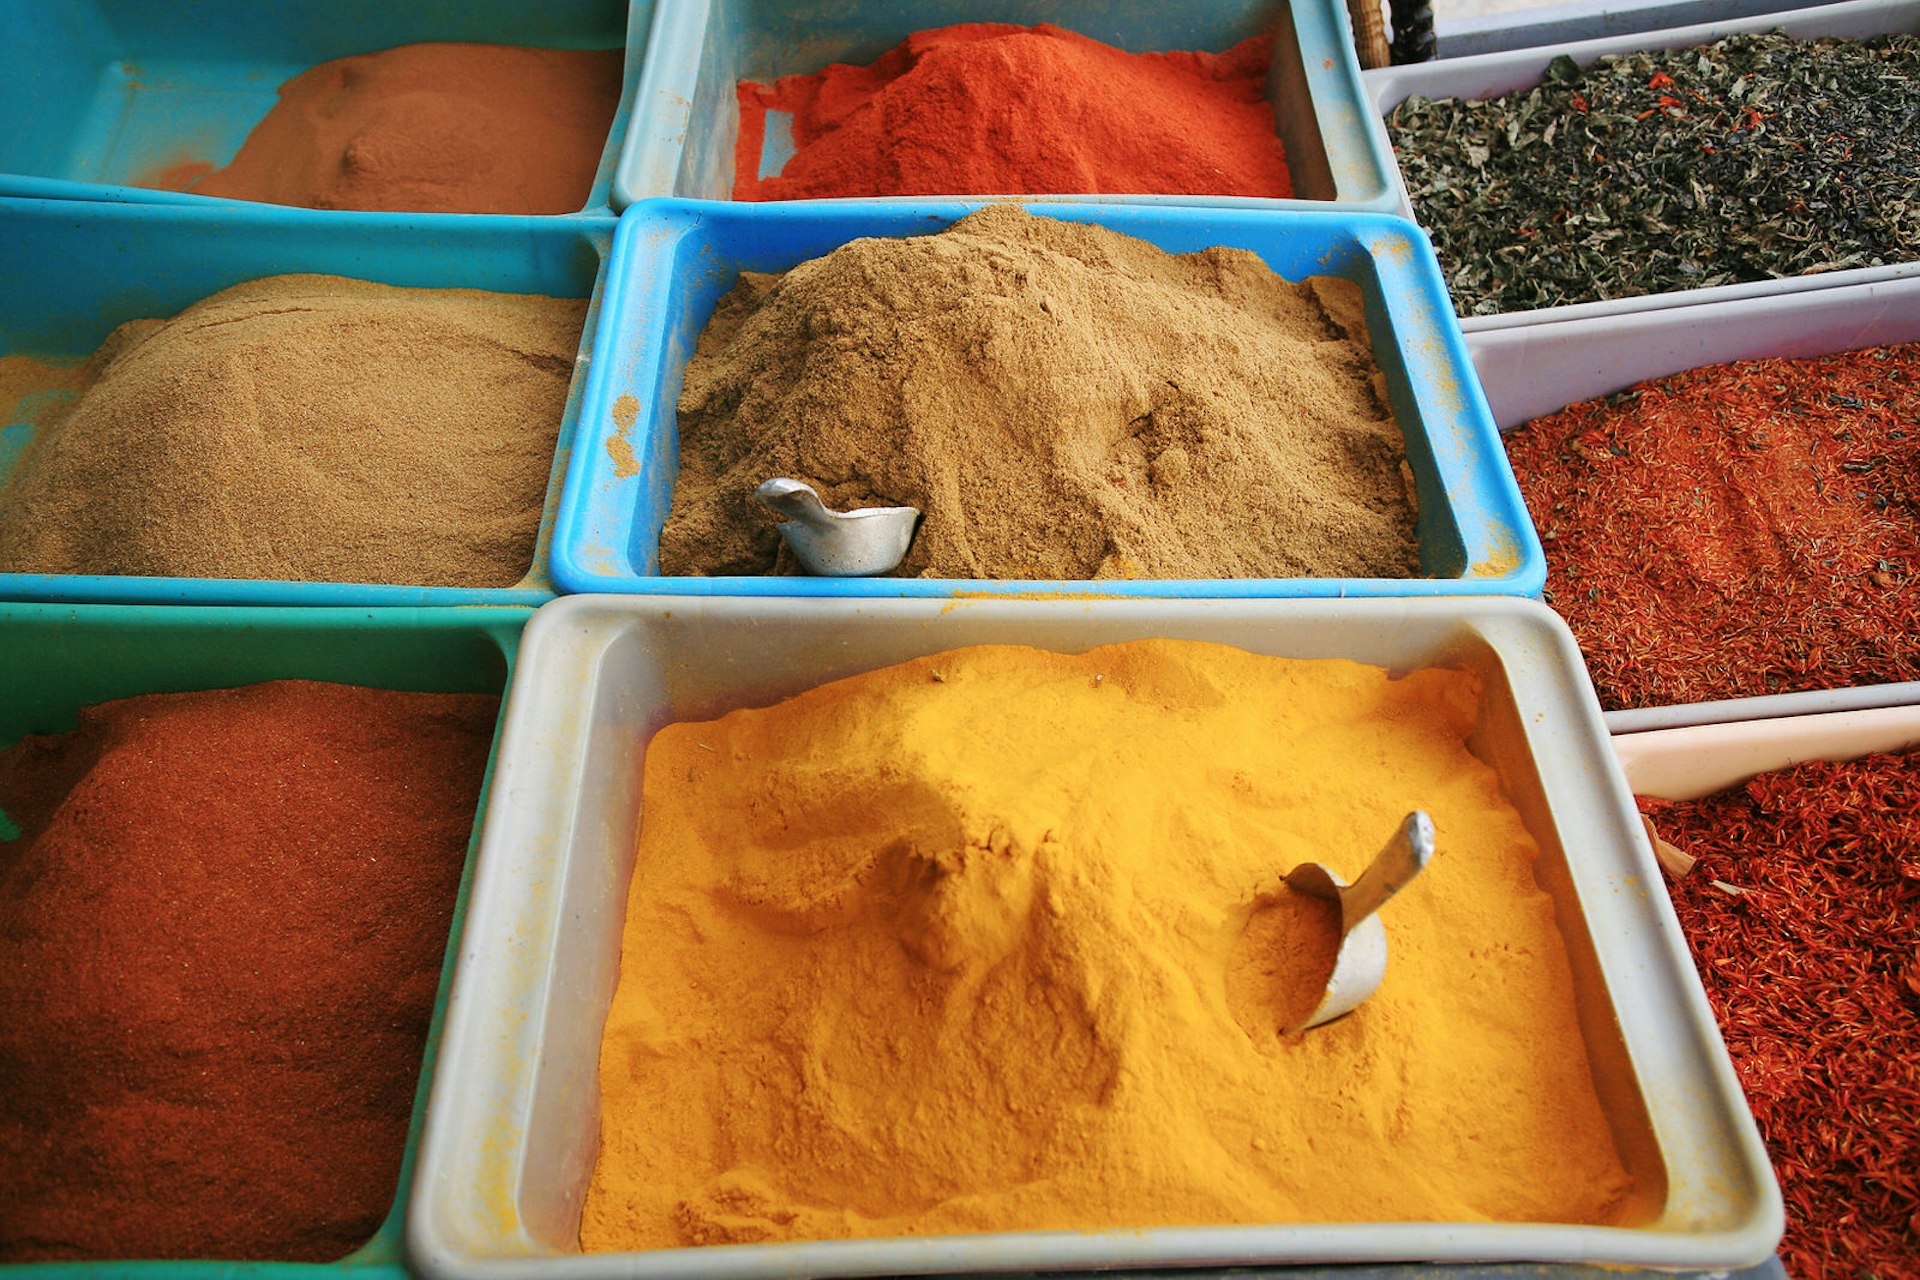 Spices on sale at a market in Tunisia